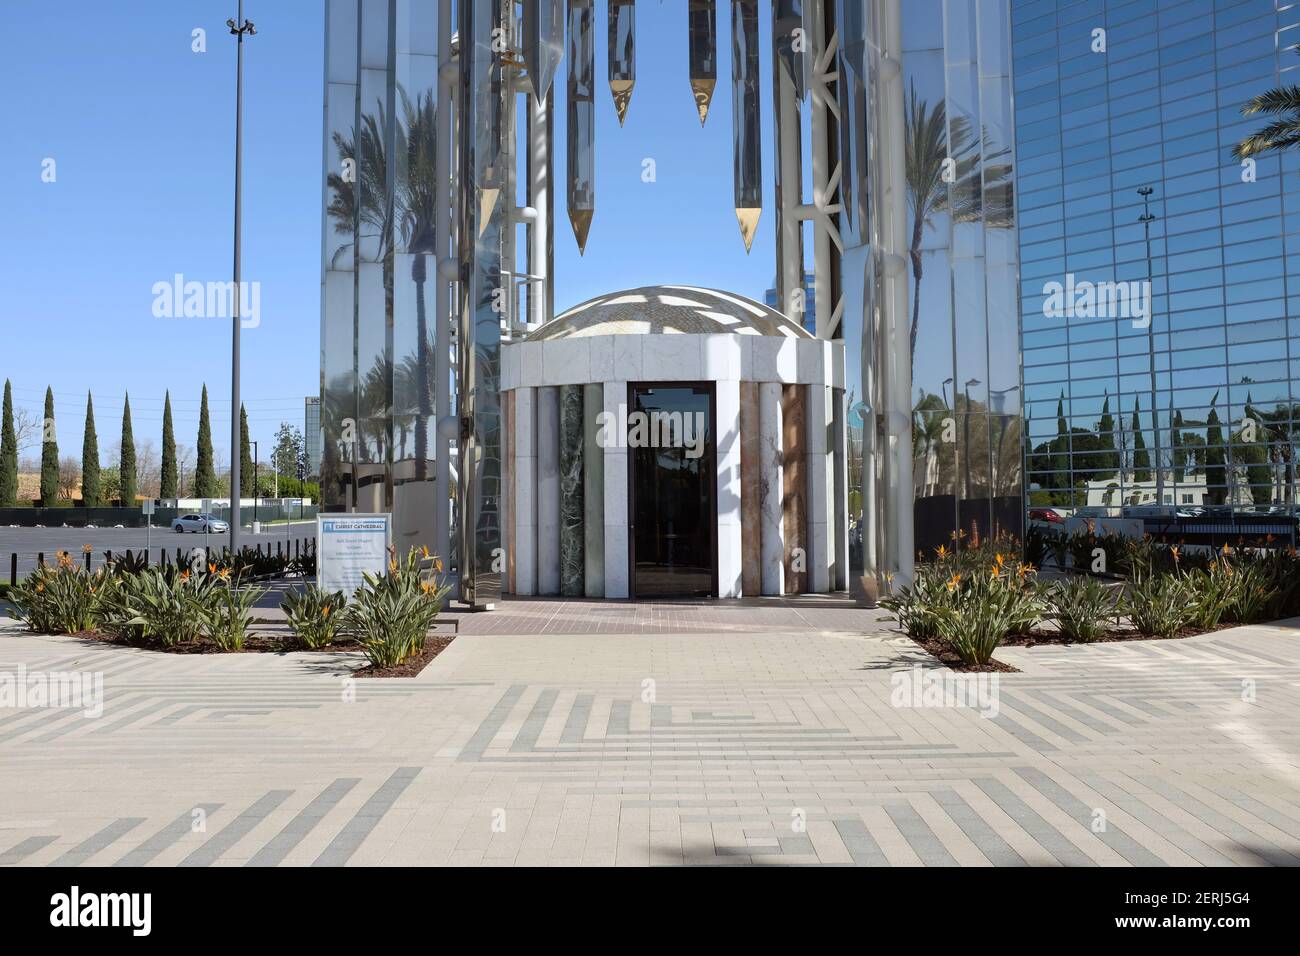 GARDEN GROVE, CALIFORNIA - 25 FEB 2021: Crystal Cathedral Prayer Chapel at the base of the Bell Tower. Stock Photo